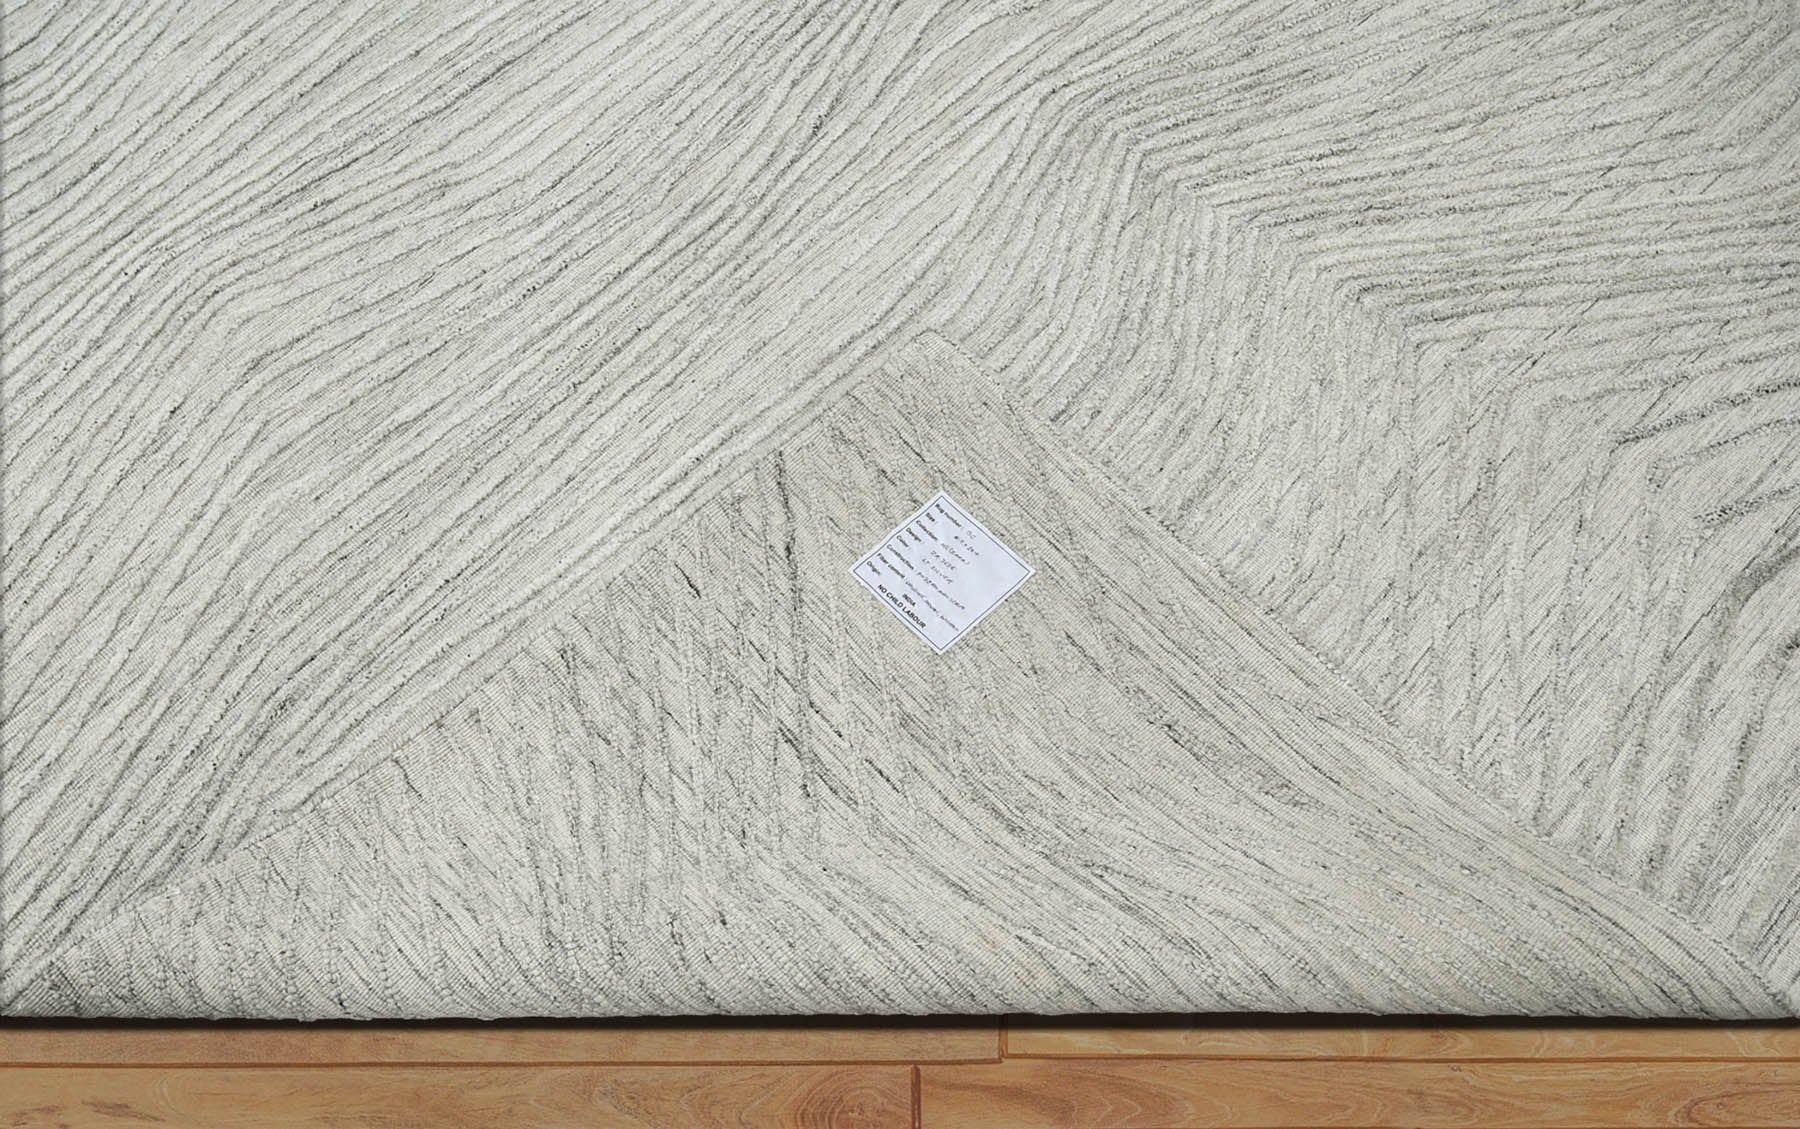 Lubow 8x10 Gray LoomBloom Hand Knotted Modern & Contemporary Textured Tibetan 100% Wool Oriental Area Rug